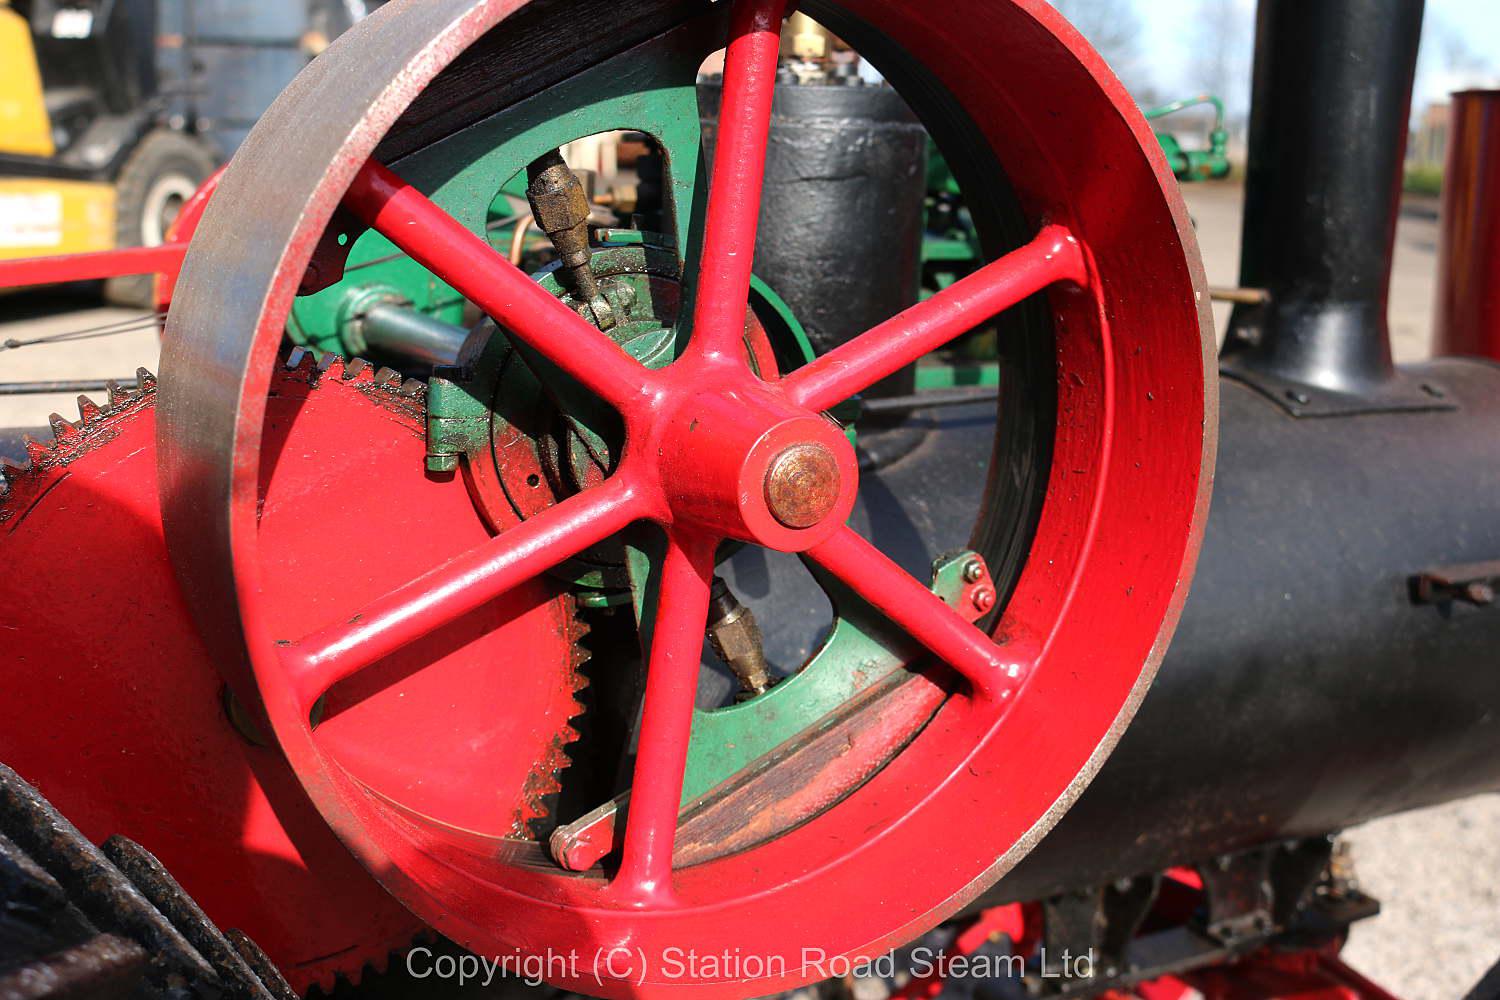 3 inch scale Minneapolis traction engine